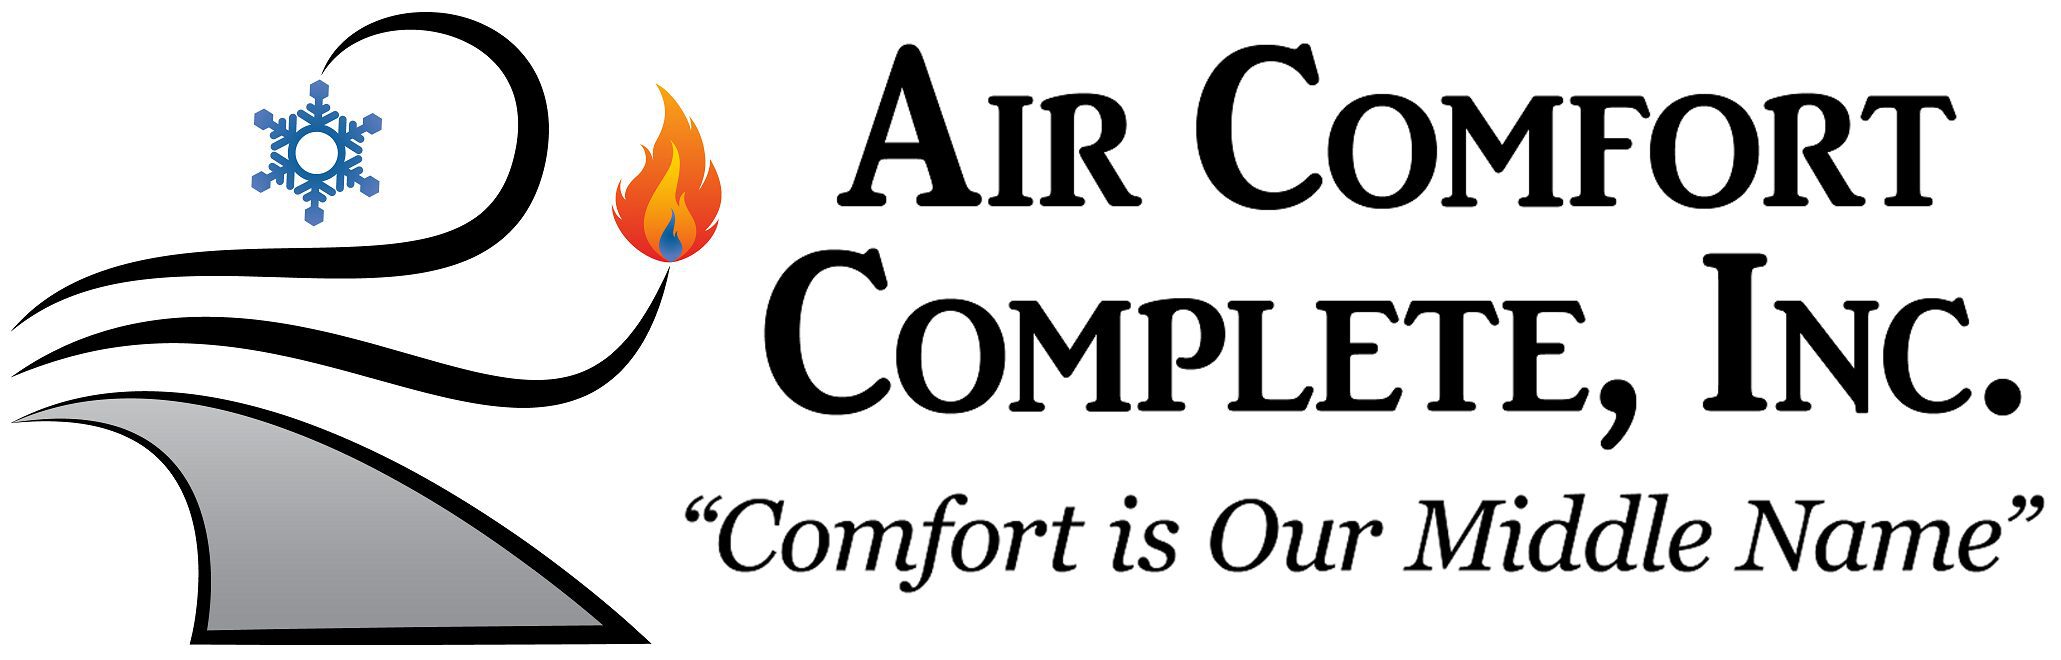 Air Comfort Complete LLC, Comfort is our middle name